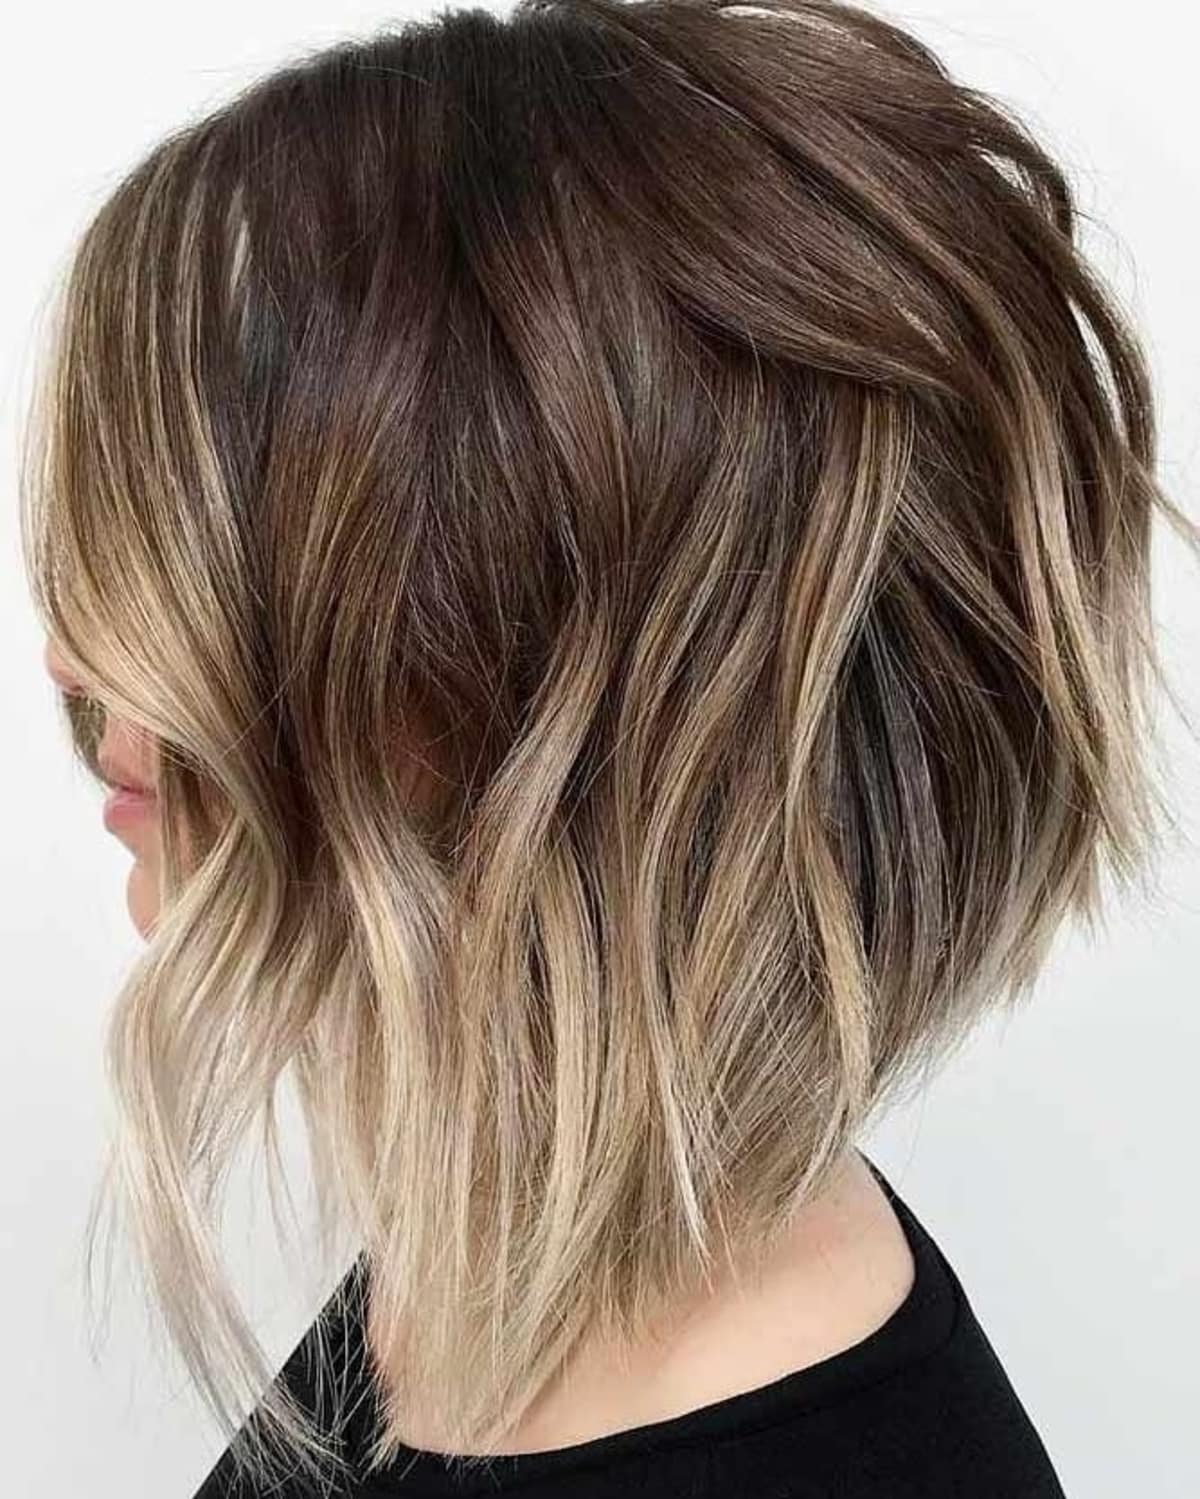 Long messy bob with blonde ombre